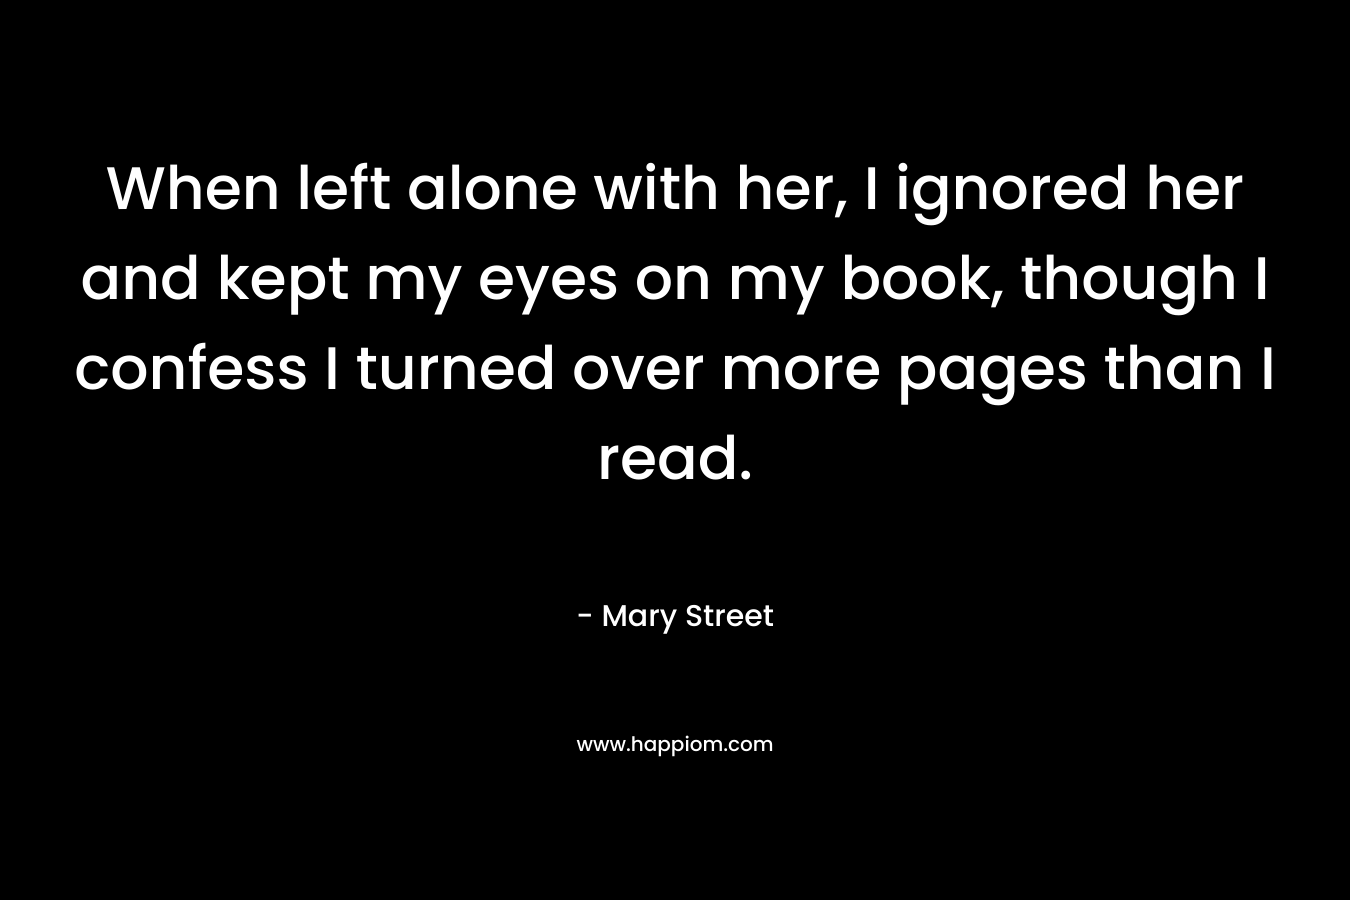 When left alone with her, I ignored her and kept my eyes on my book, though I confess I turned over more pages than I read.